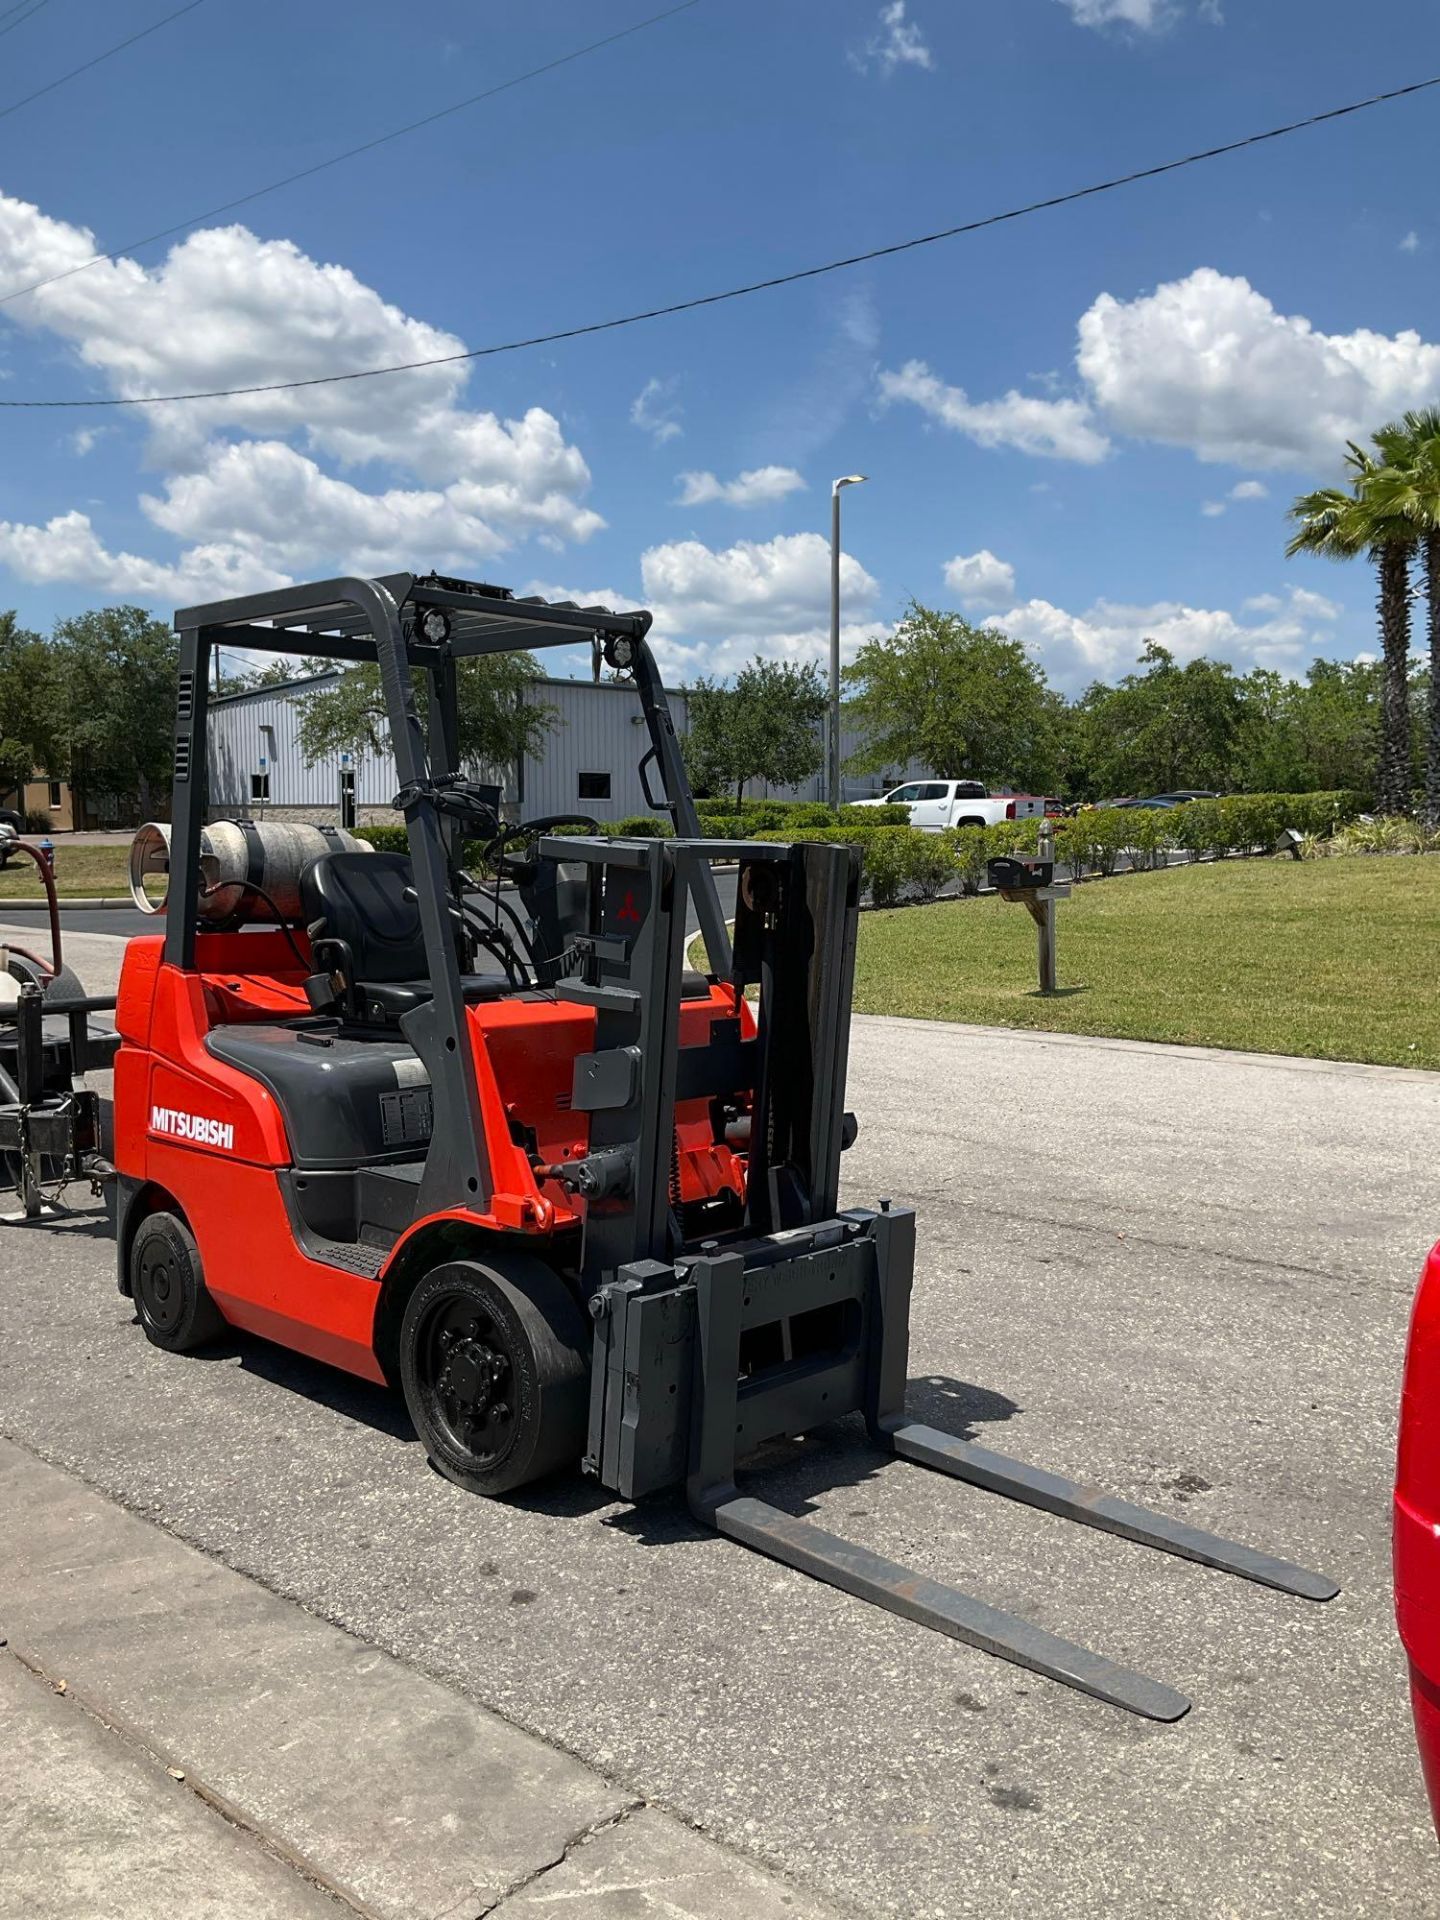 MITSUBISHI FORKLIFT MODEL FGC25N-LP, LP POWERED, APPROX MAX CAPACITY 5000LBS - Image 2 of 14